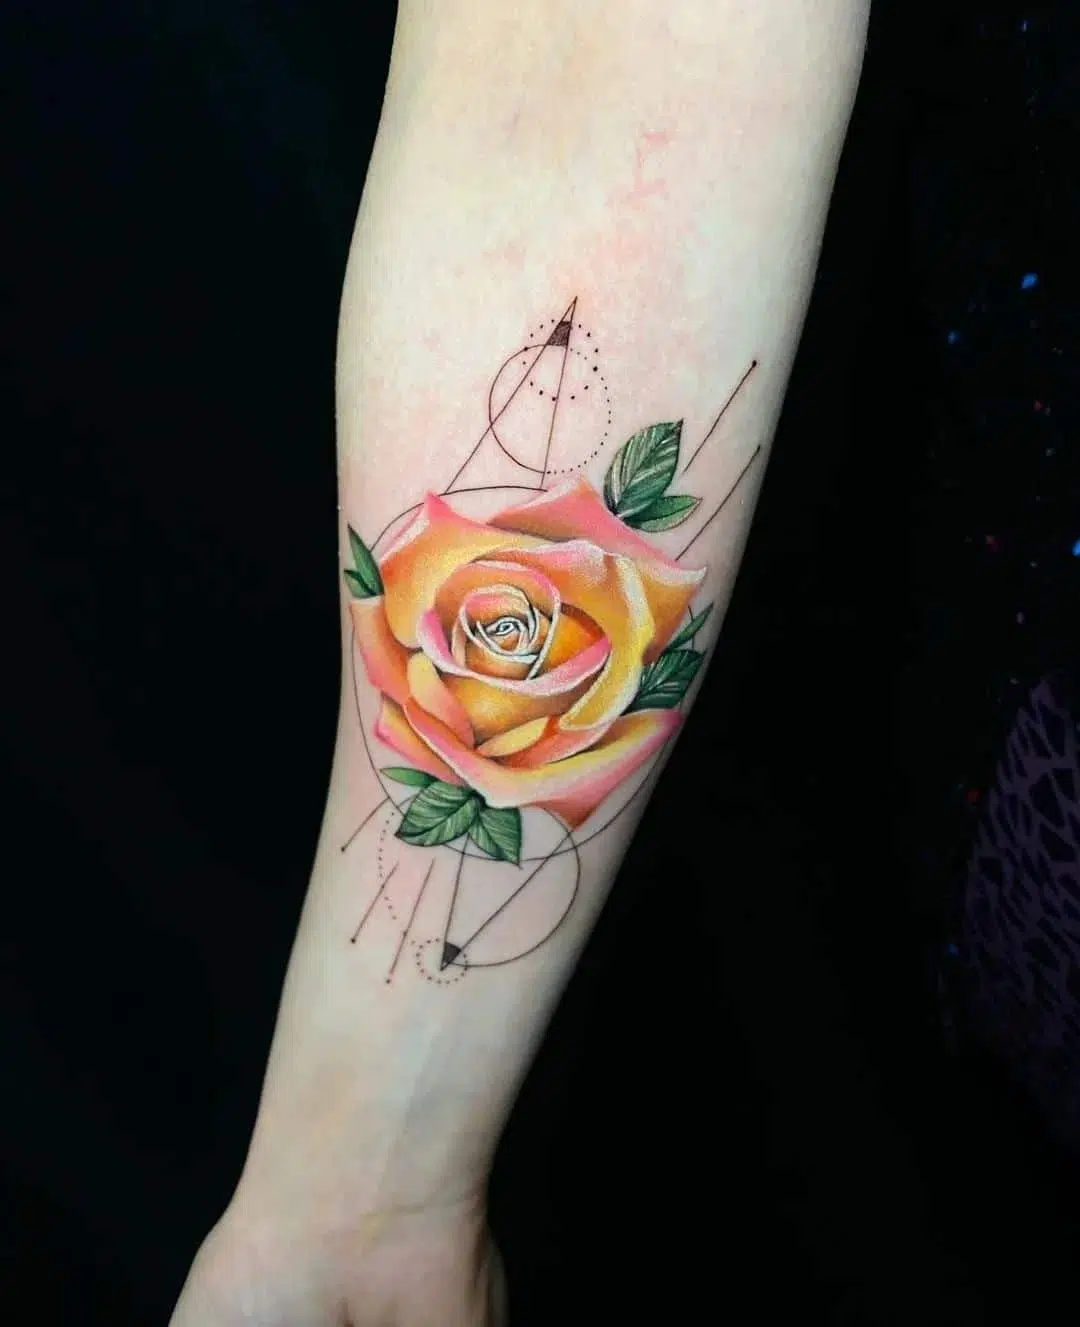 A rose for the lovely Meggan. Tattoo by Noemi noemi_tattoo 

                   